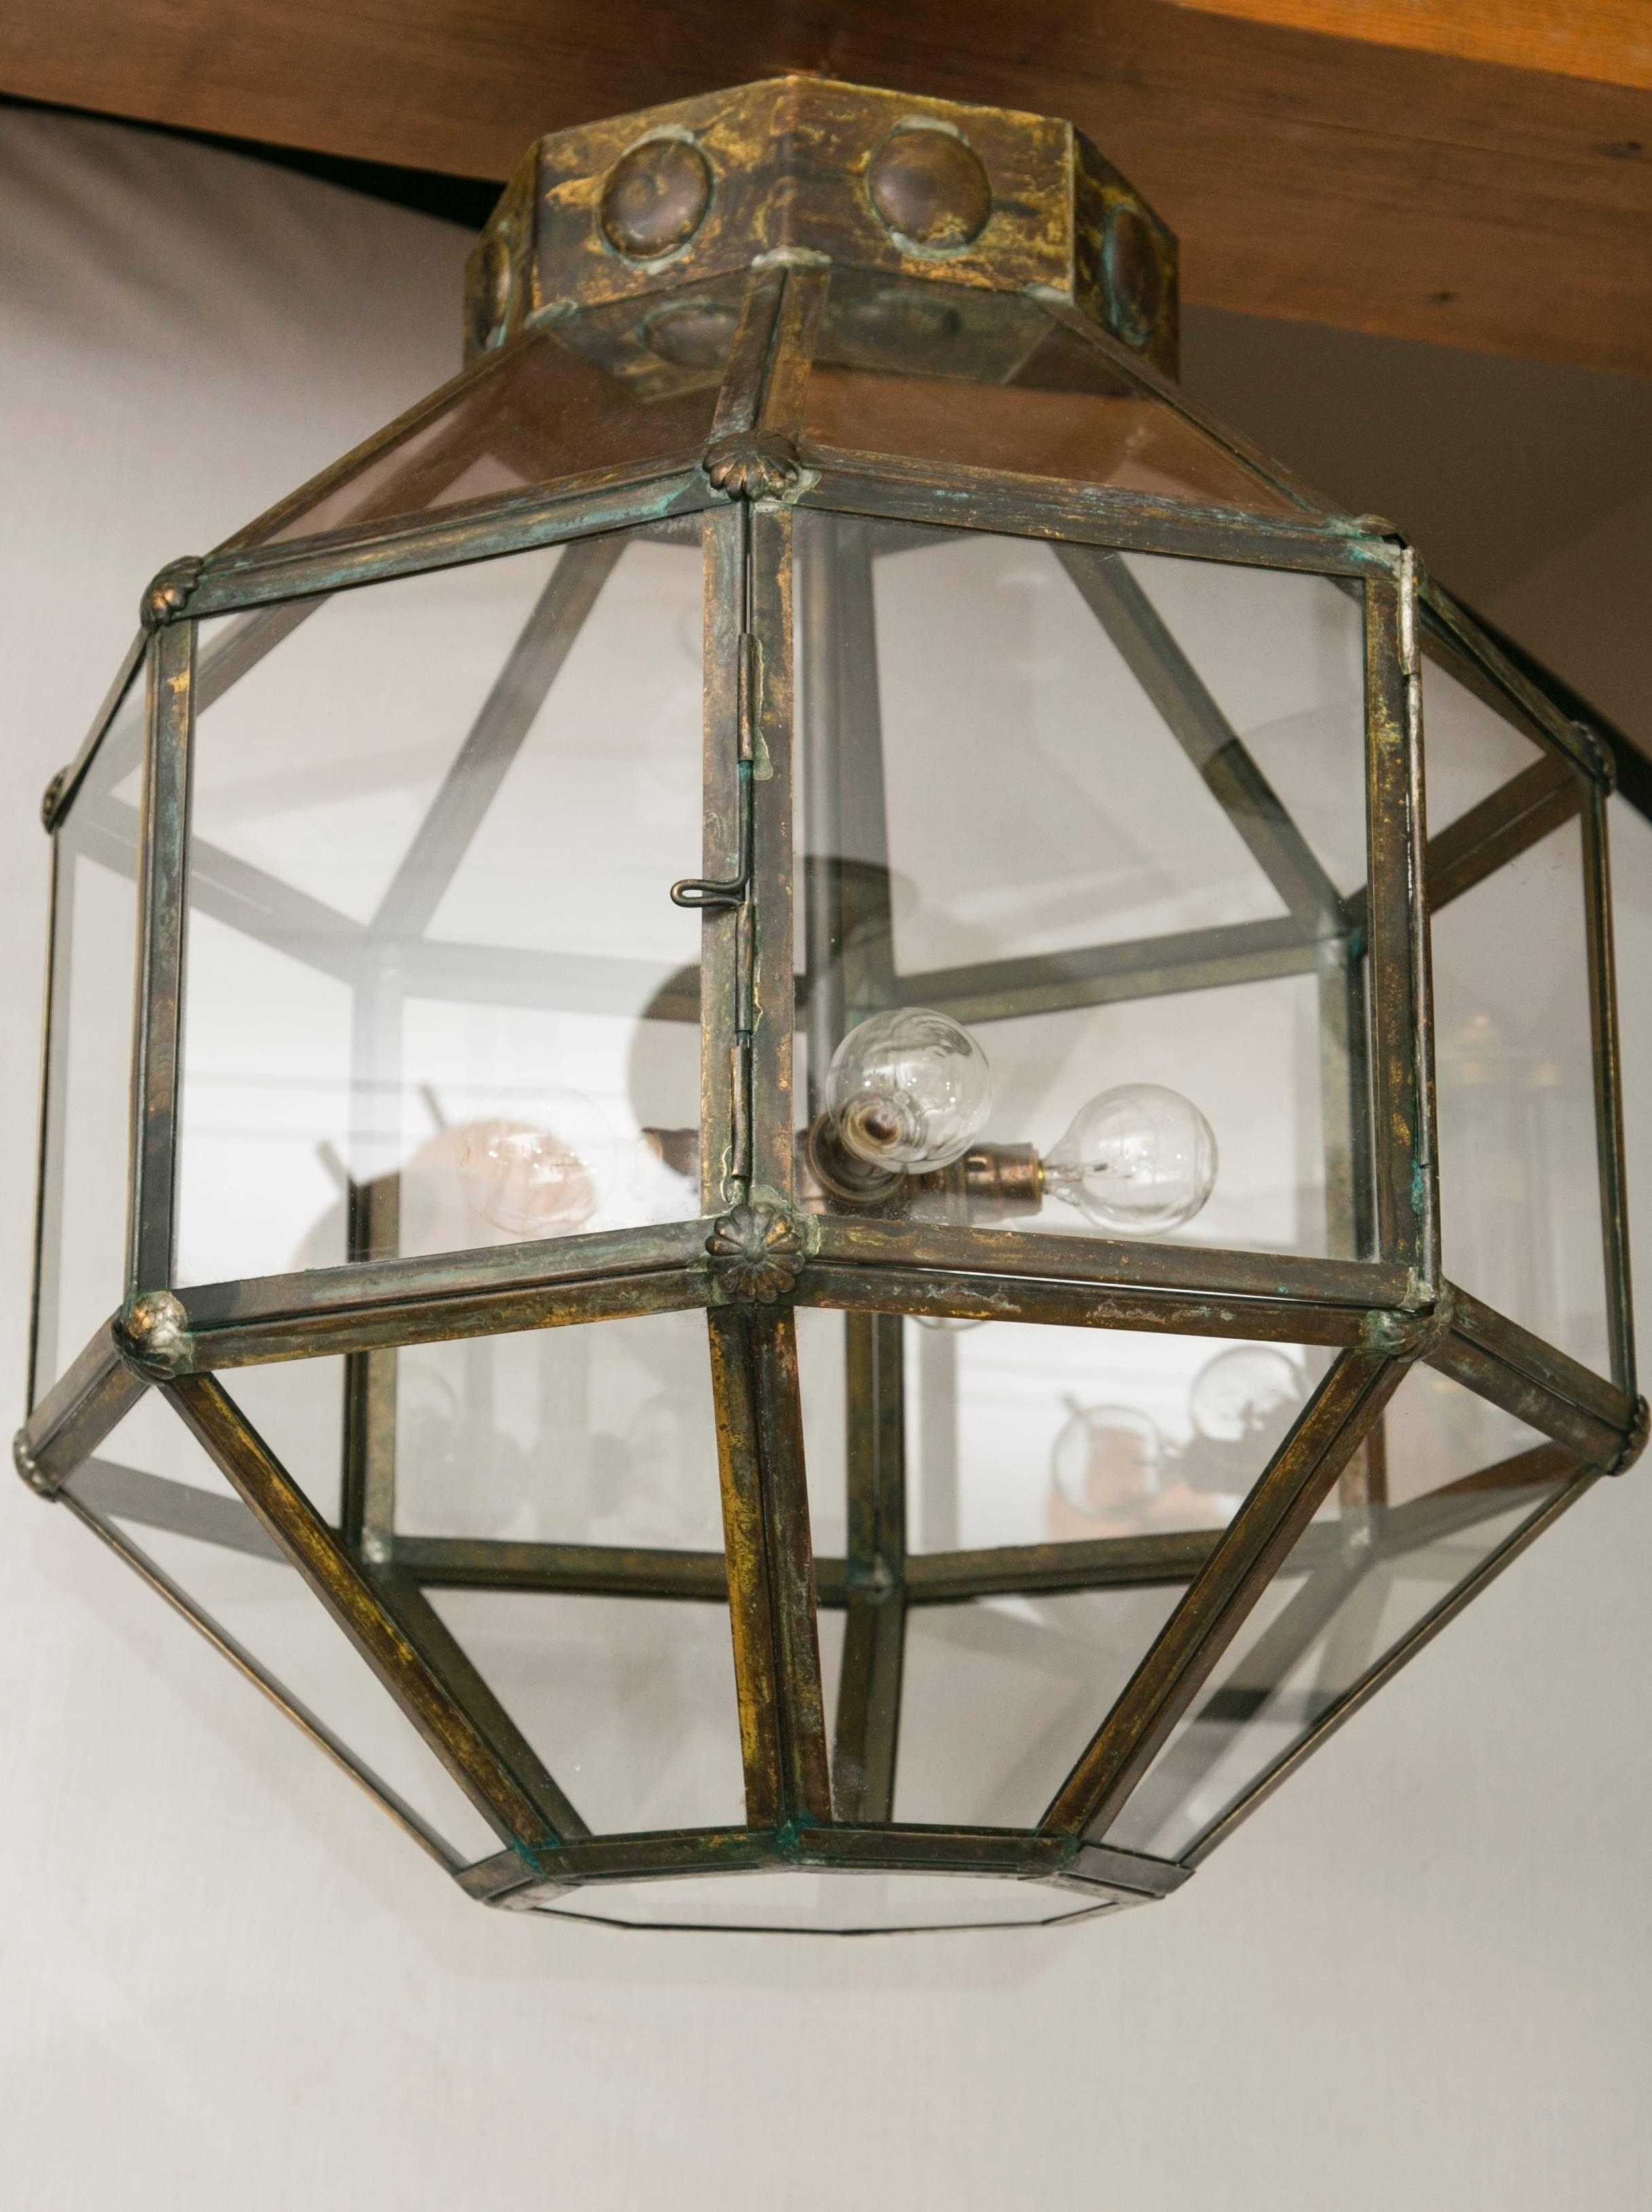 Minimalist antiqued brass octagonal lanterns recently illuminated with five light interior chandelier can be installed with a single chain with canopy or may be modified hanging by 3 chains.

Electrified to code and install ready, additional to UL